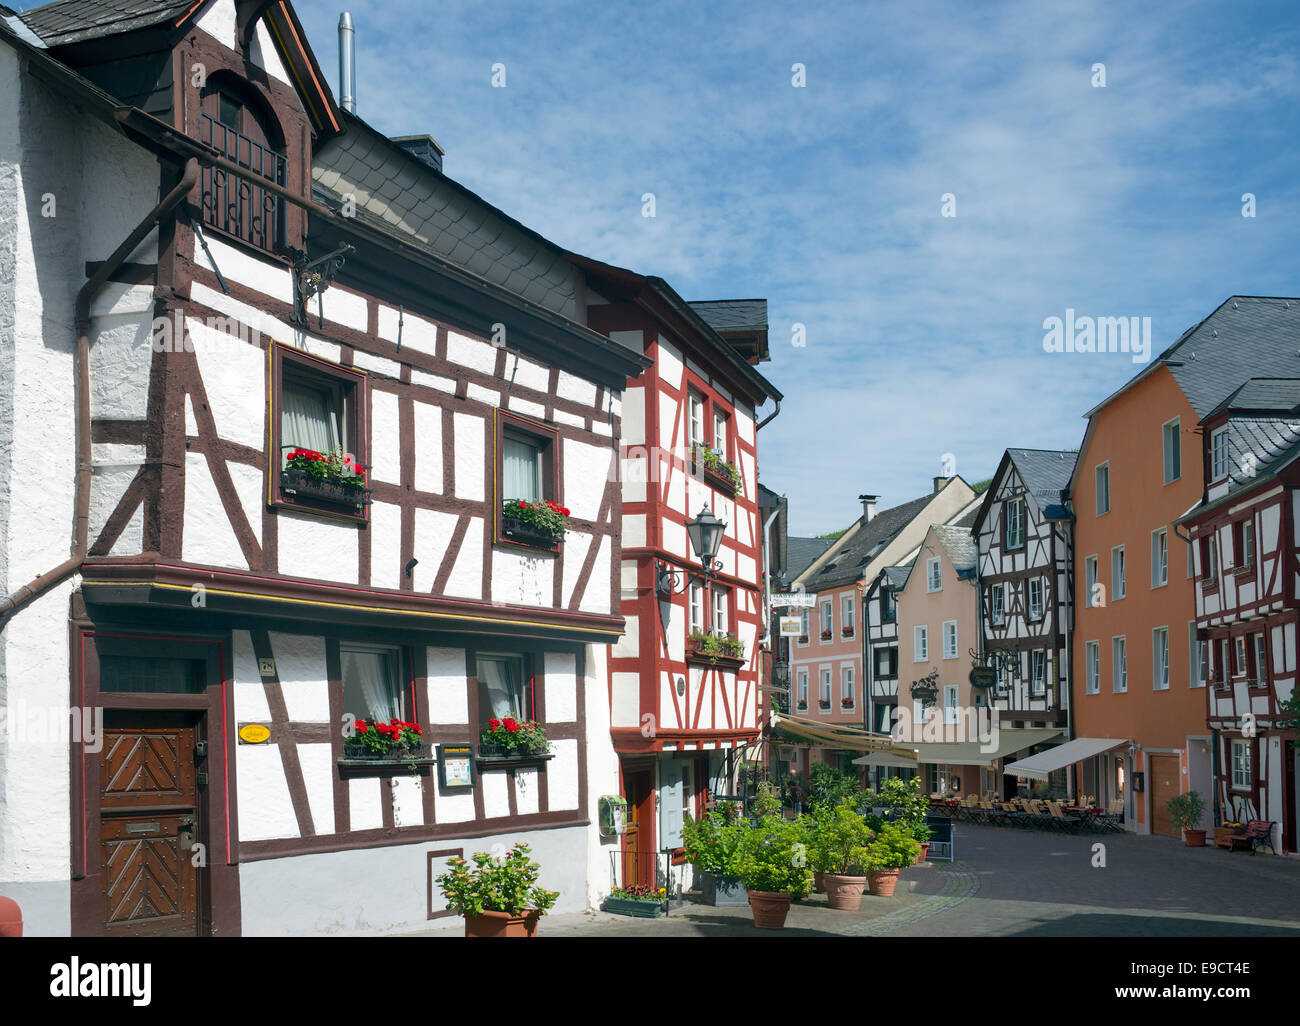 Half timbered buildings old town Bernkastel-Kues Moselle Valley Germany Stock Photo